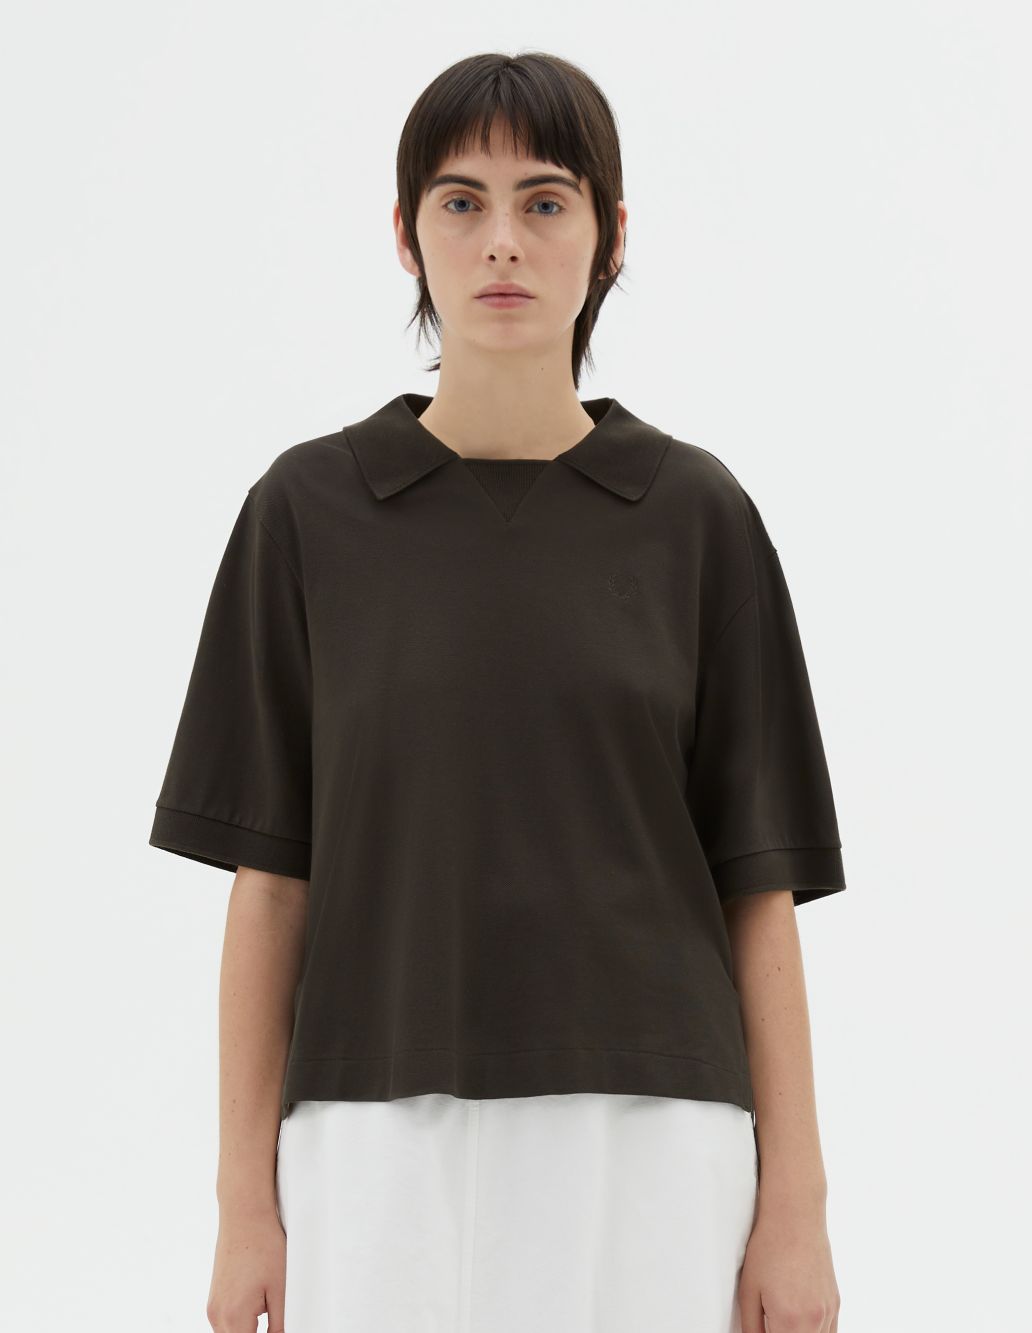 MARGARET HOWELL - Assam cotton pique Fred Perry polo shirt 